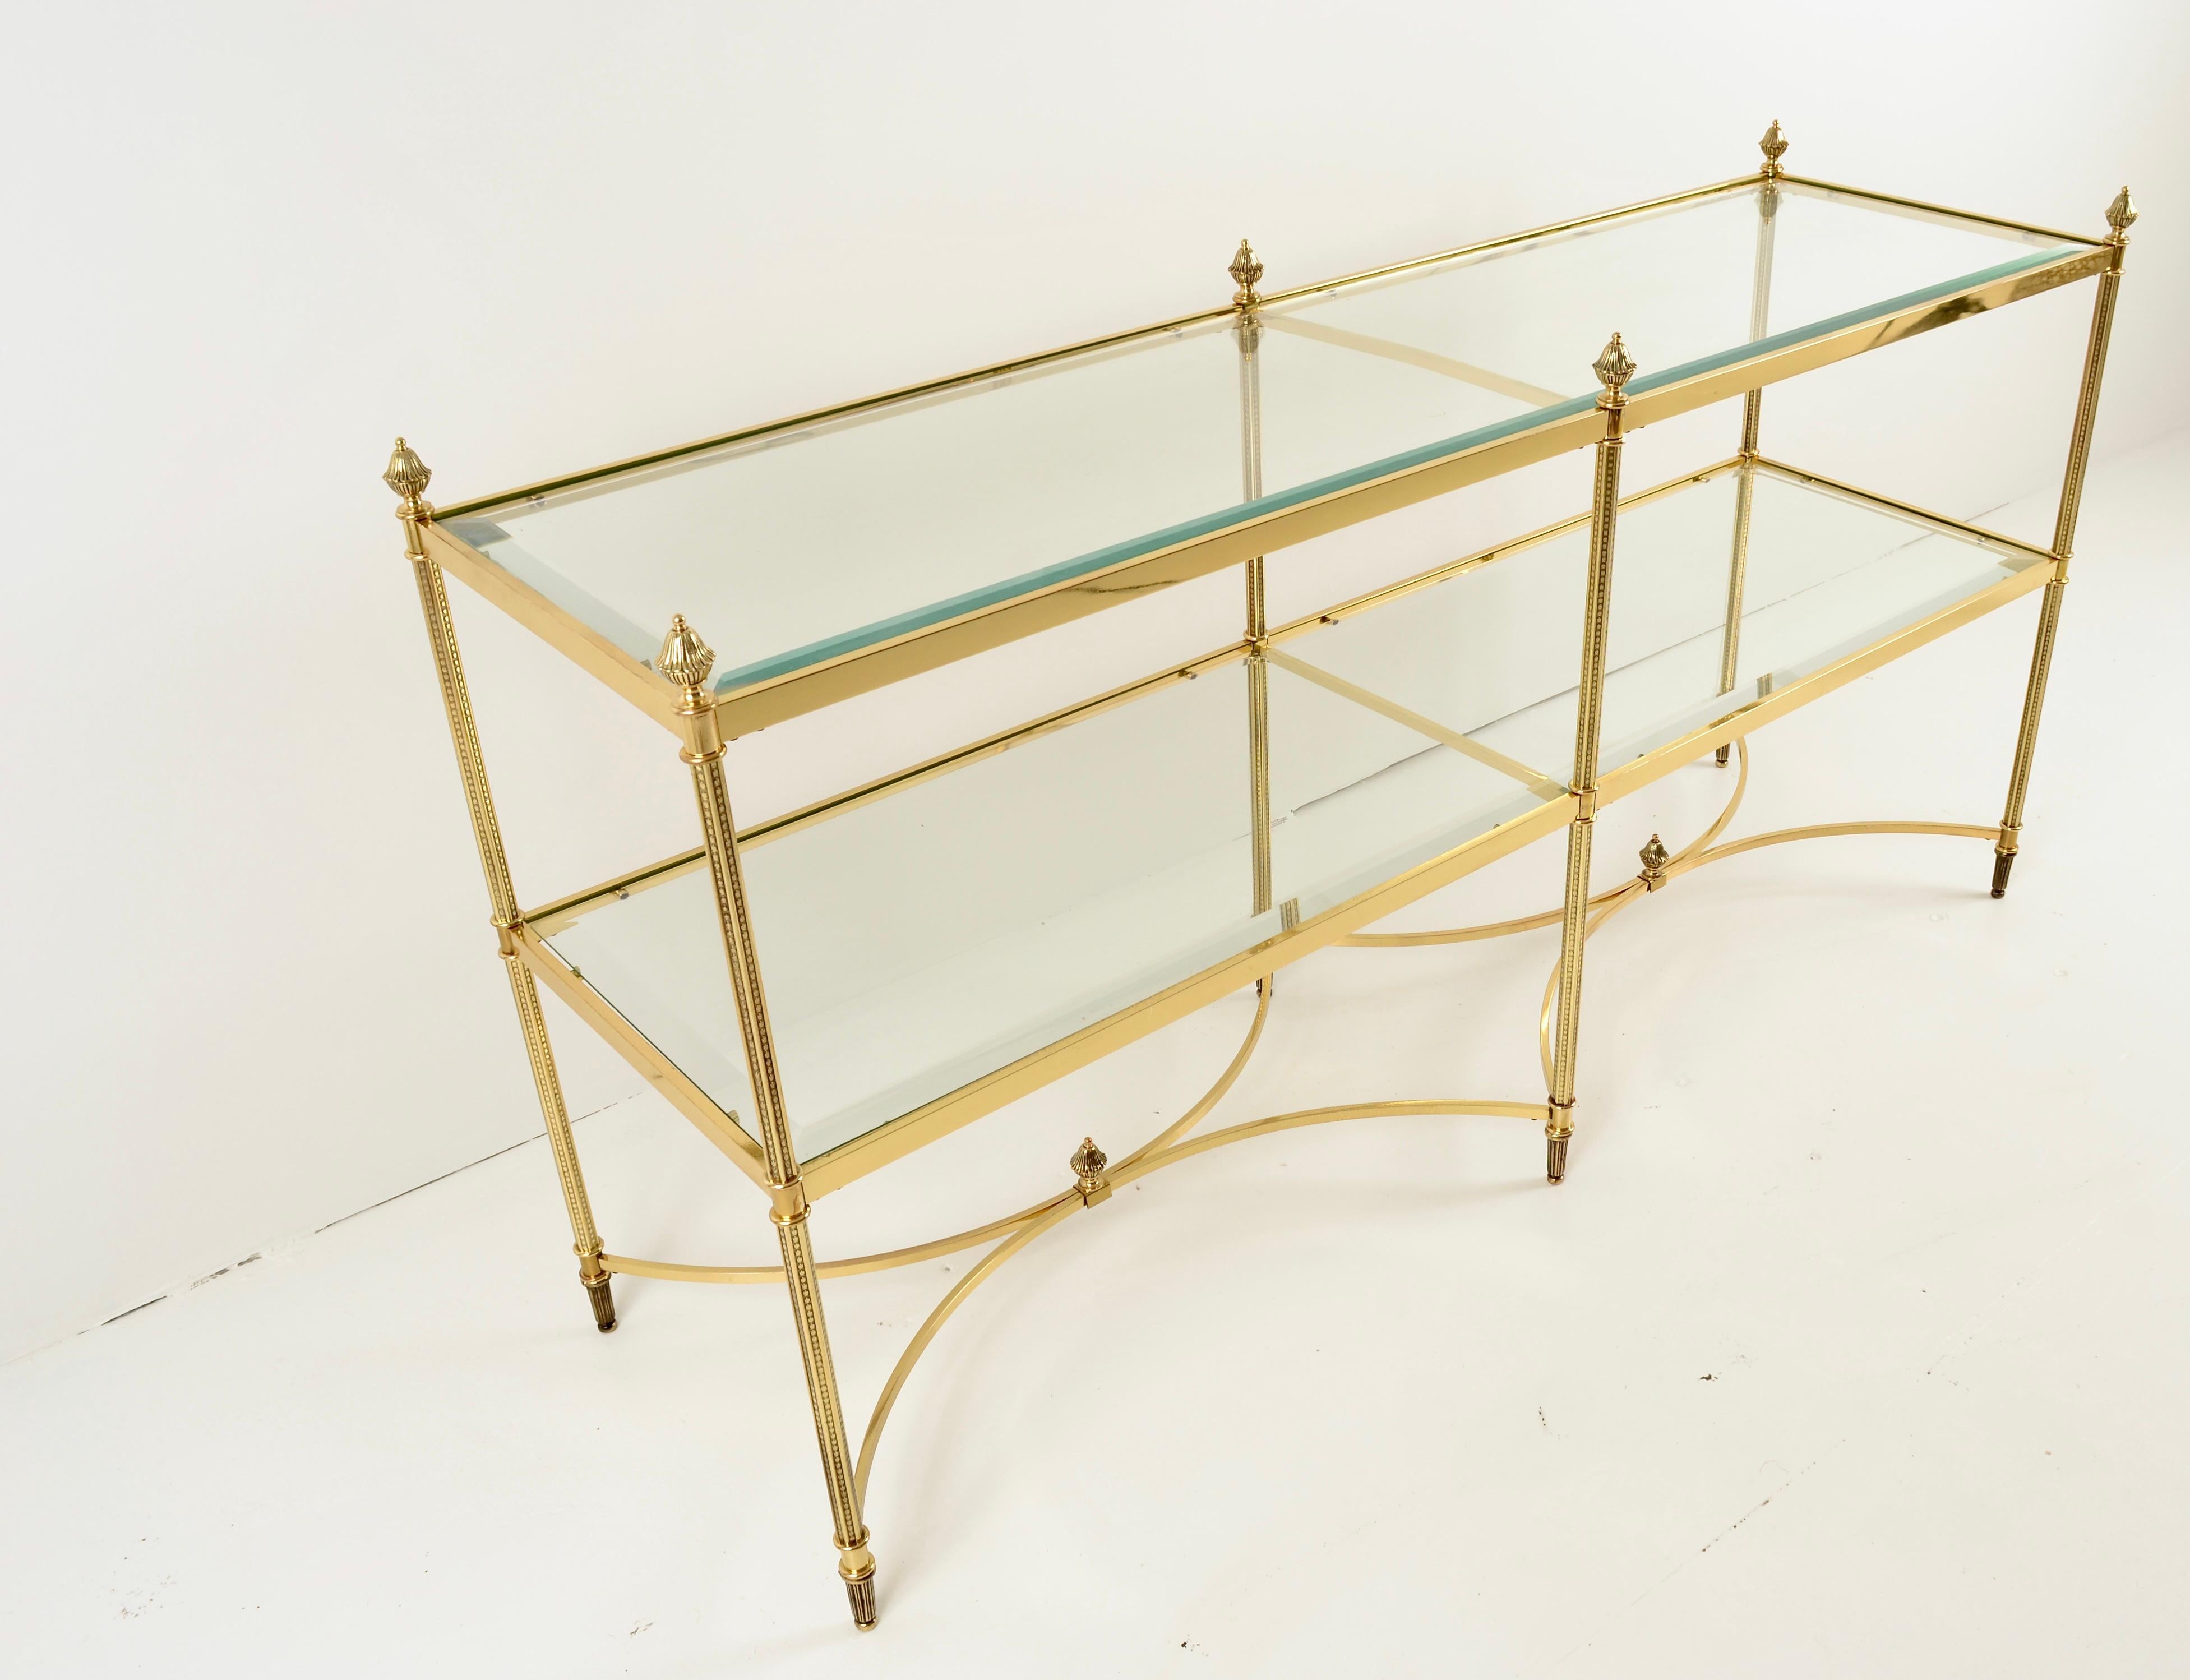 American Neo-classical Form Sofa Table in Polished Brass w/ Beveled Glass Shelves For Sale